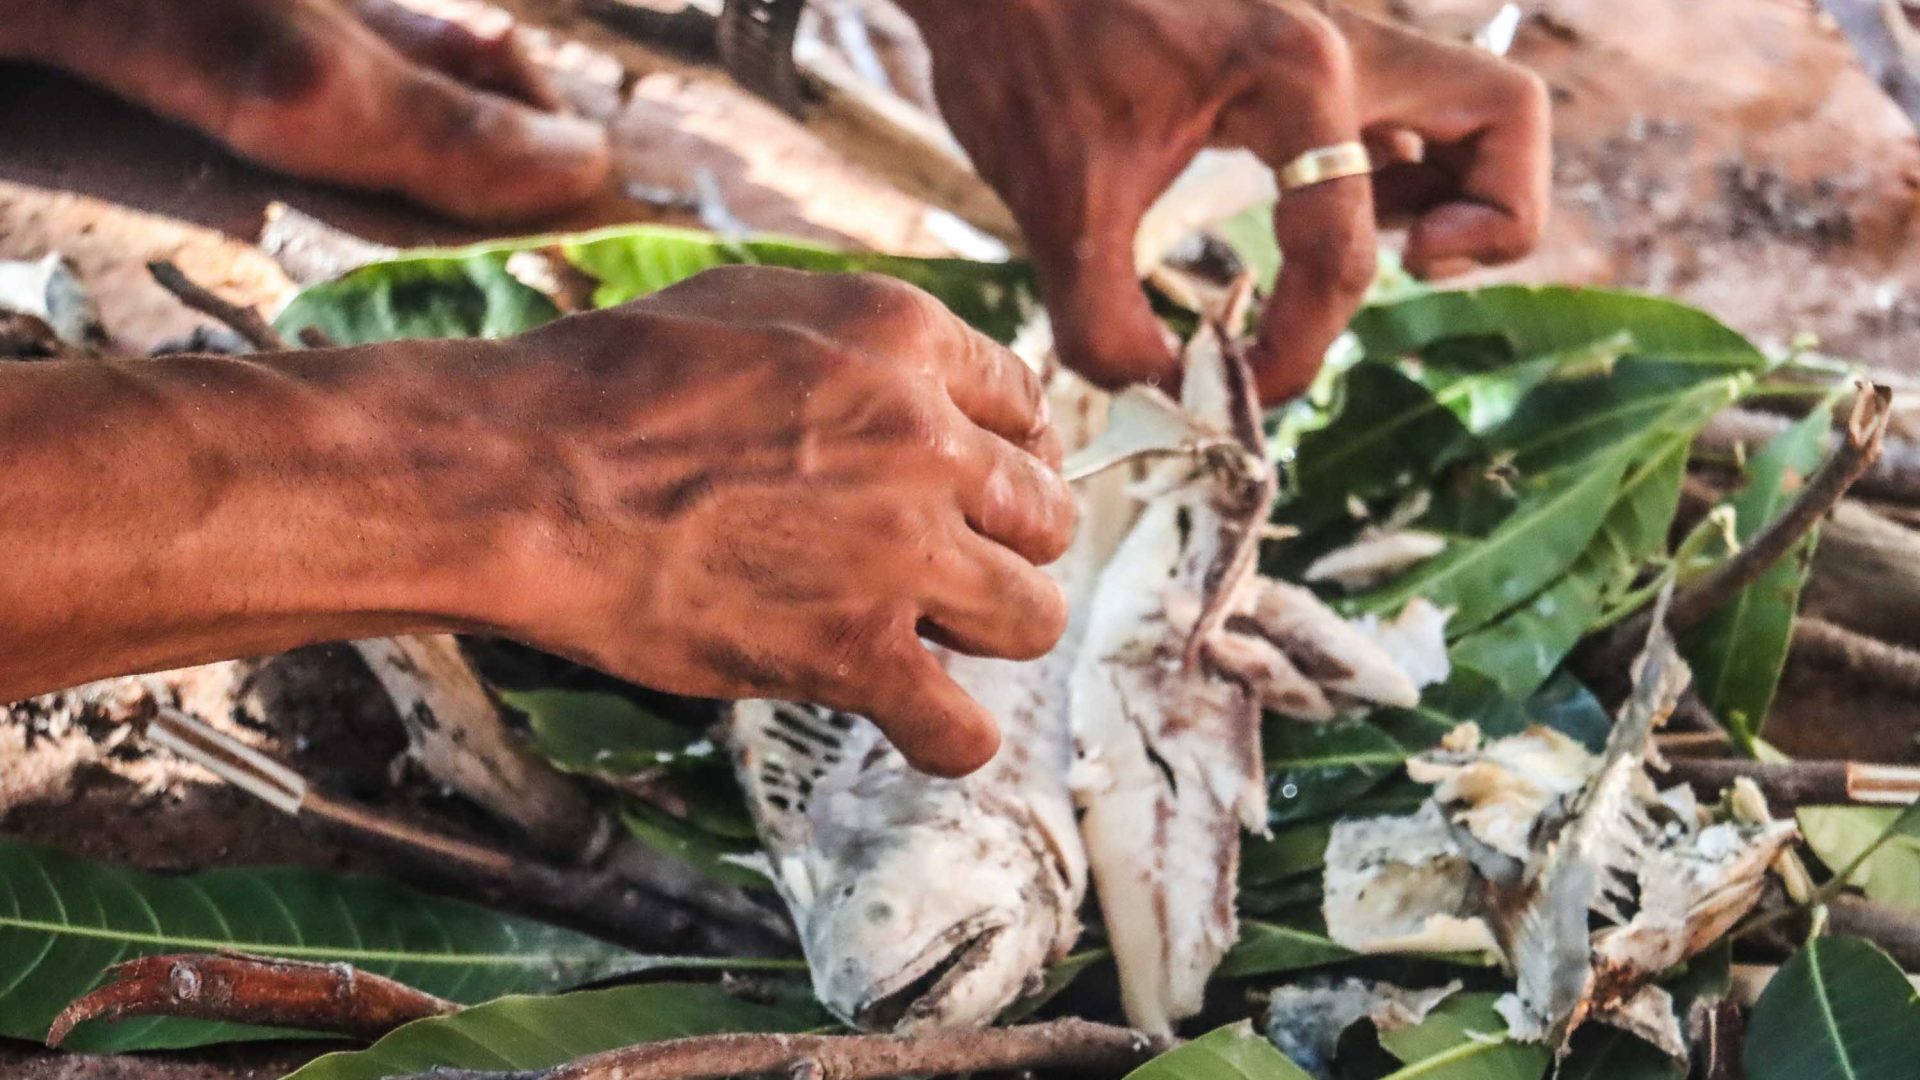 Hands pull apart some fish on a pile of leaves.